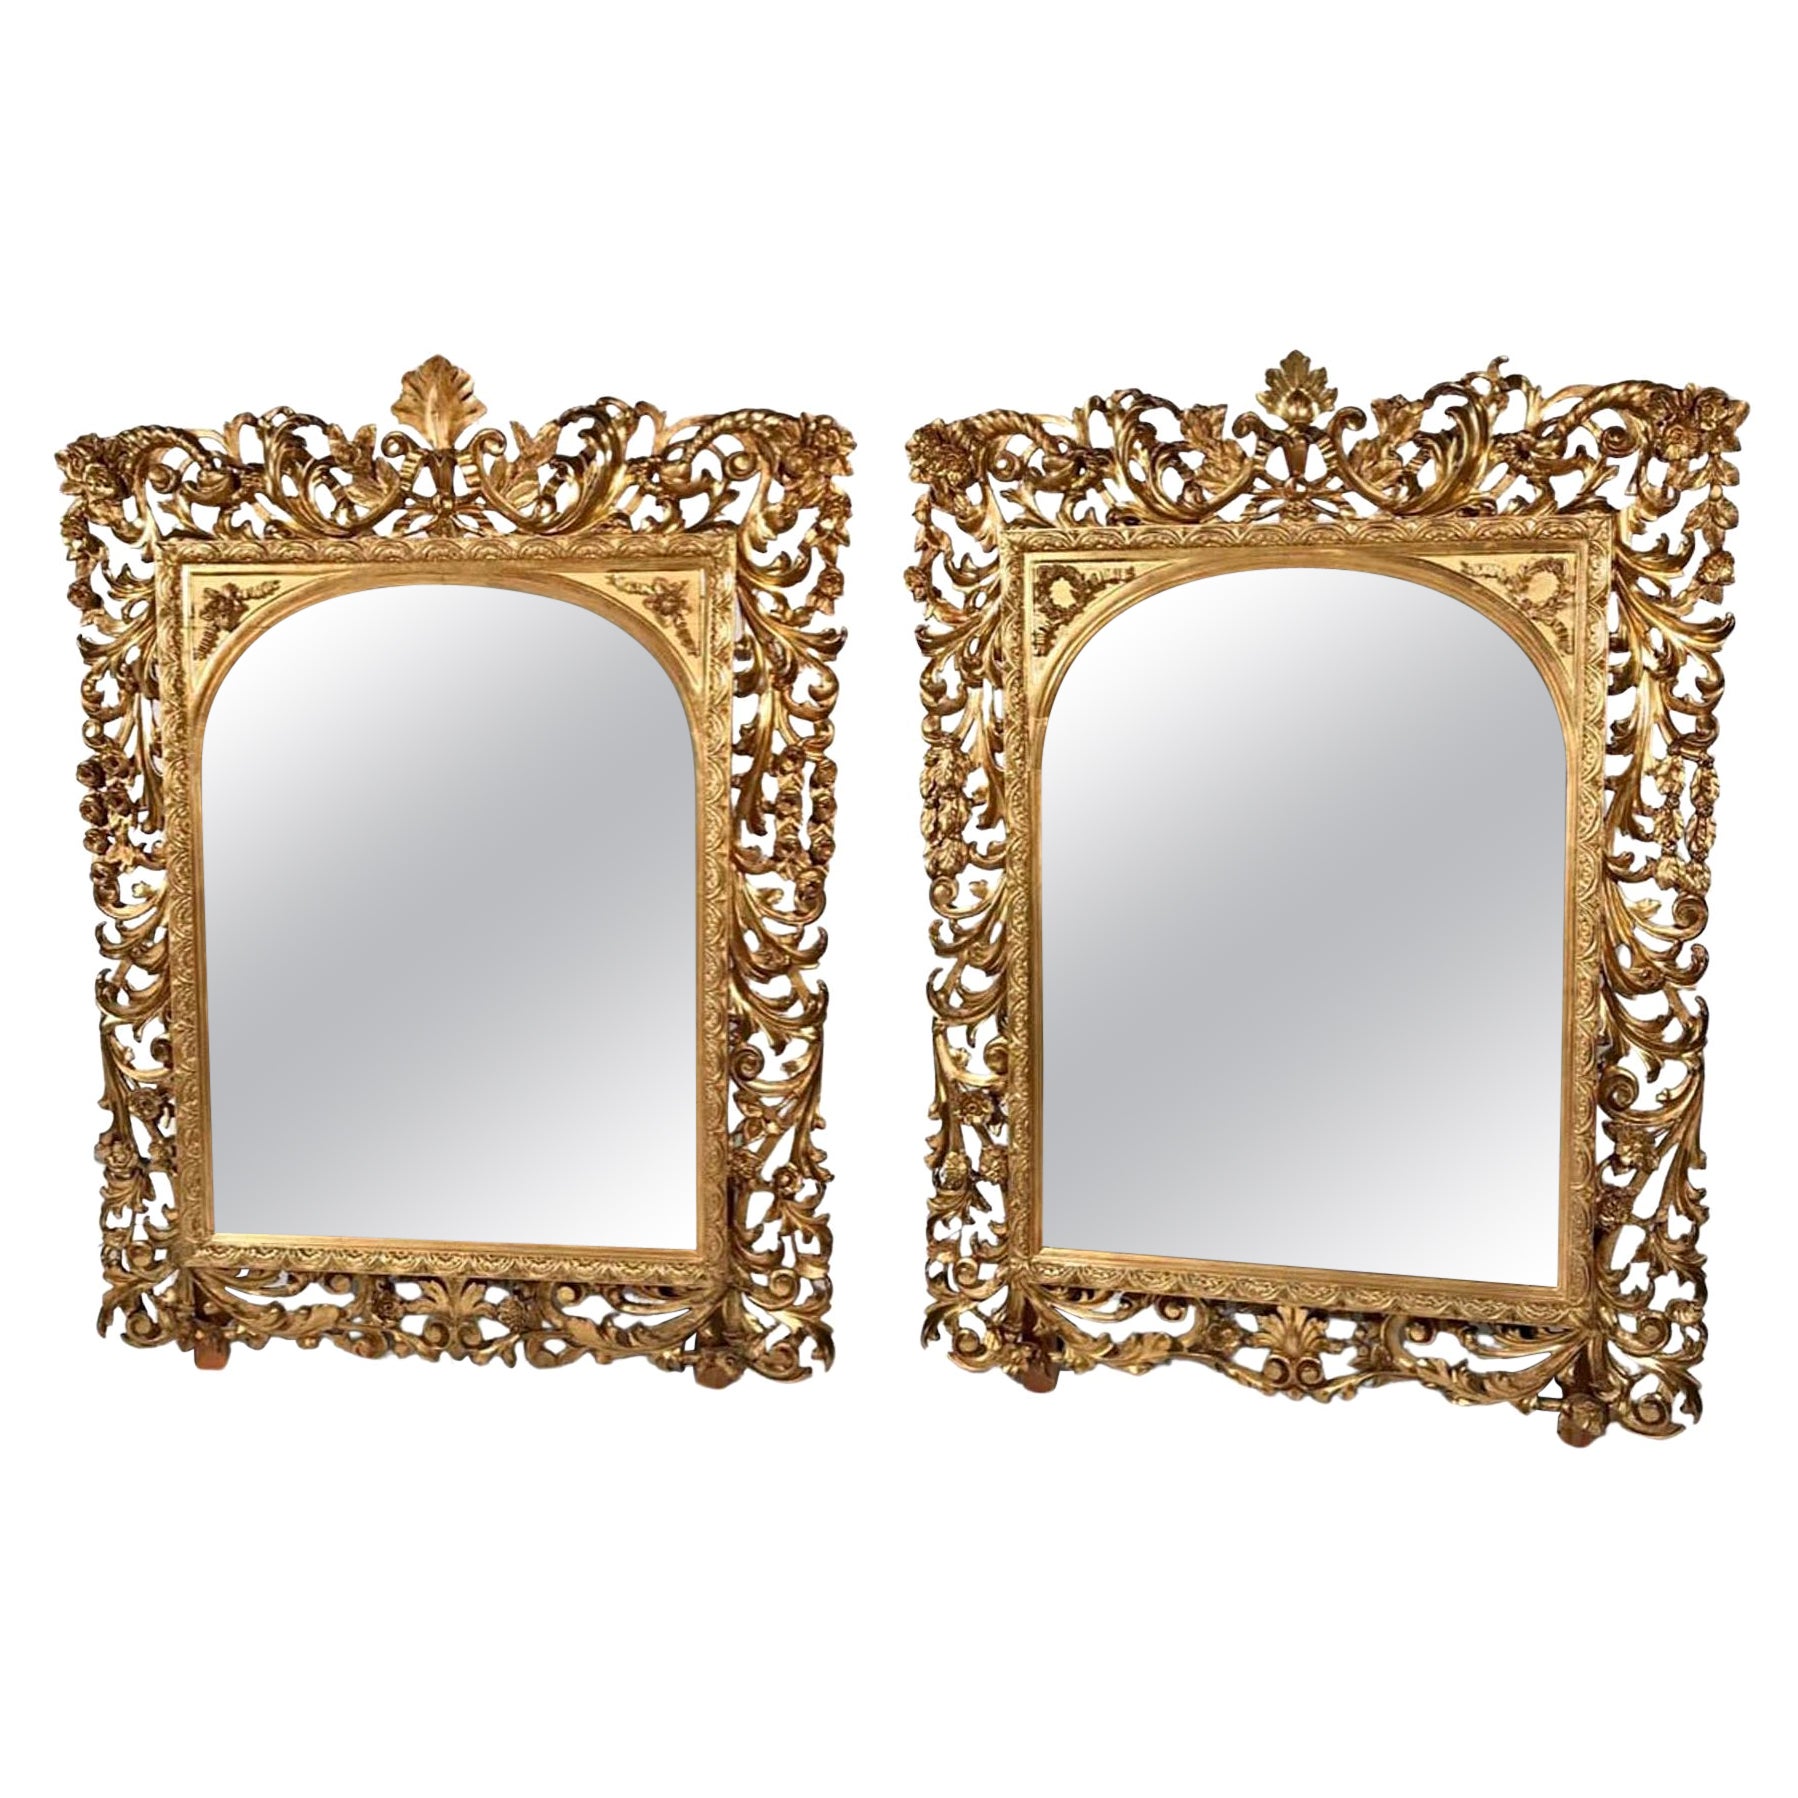 Near Pair of  Florentine Baroque Giltwood Mirrors  For Sale